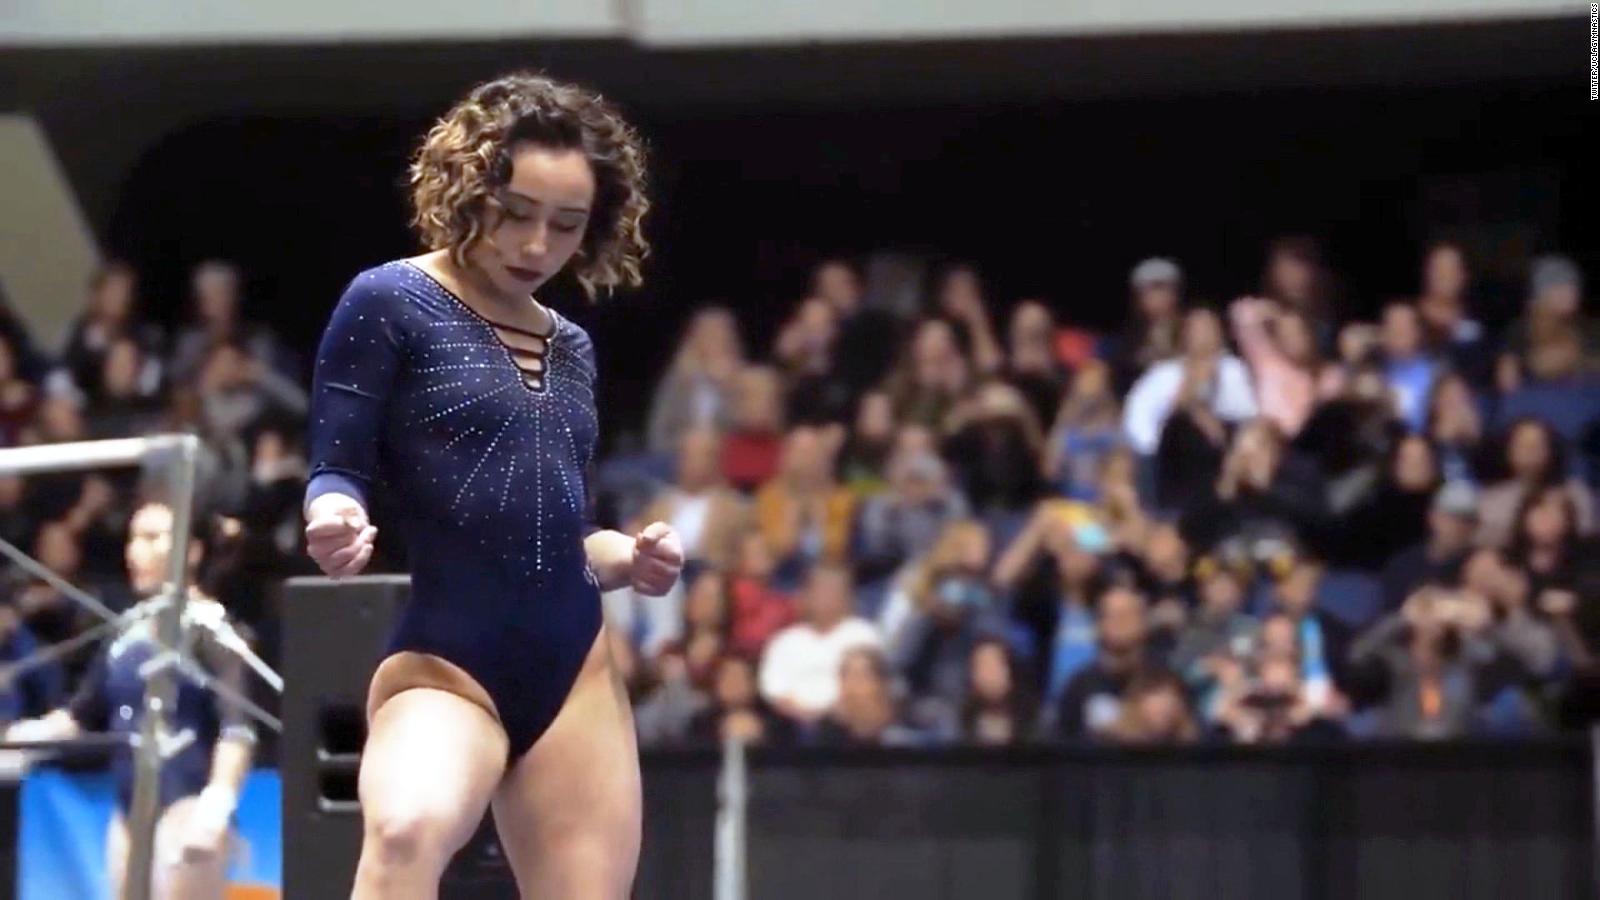 Katelyn Ohashi, UCLA gymnast, performs her final collegiate routine